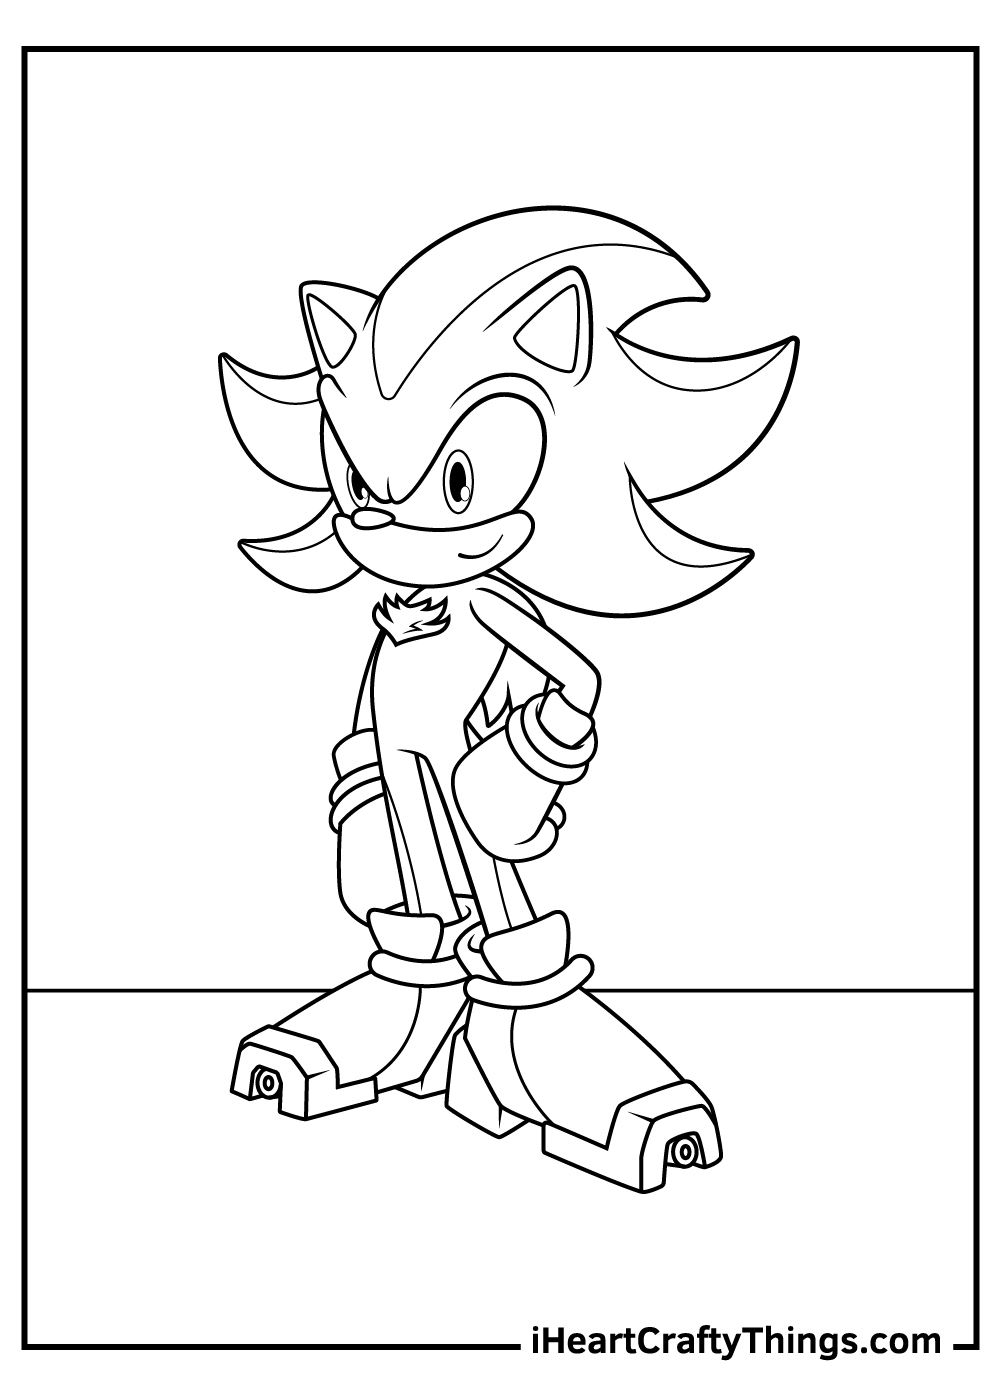 Shadow the hedgehog coloring pages updated